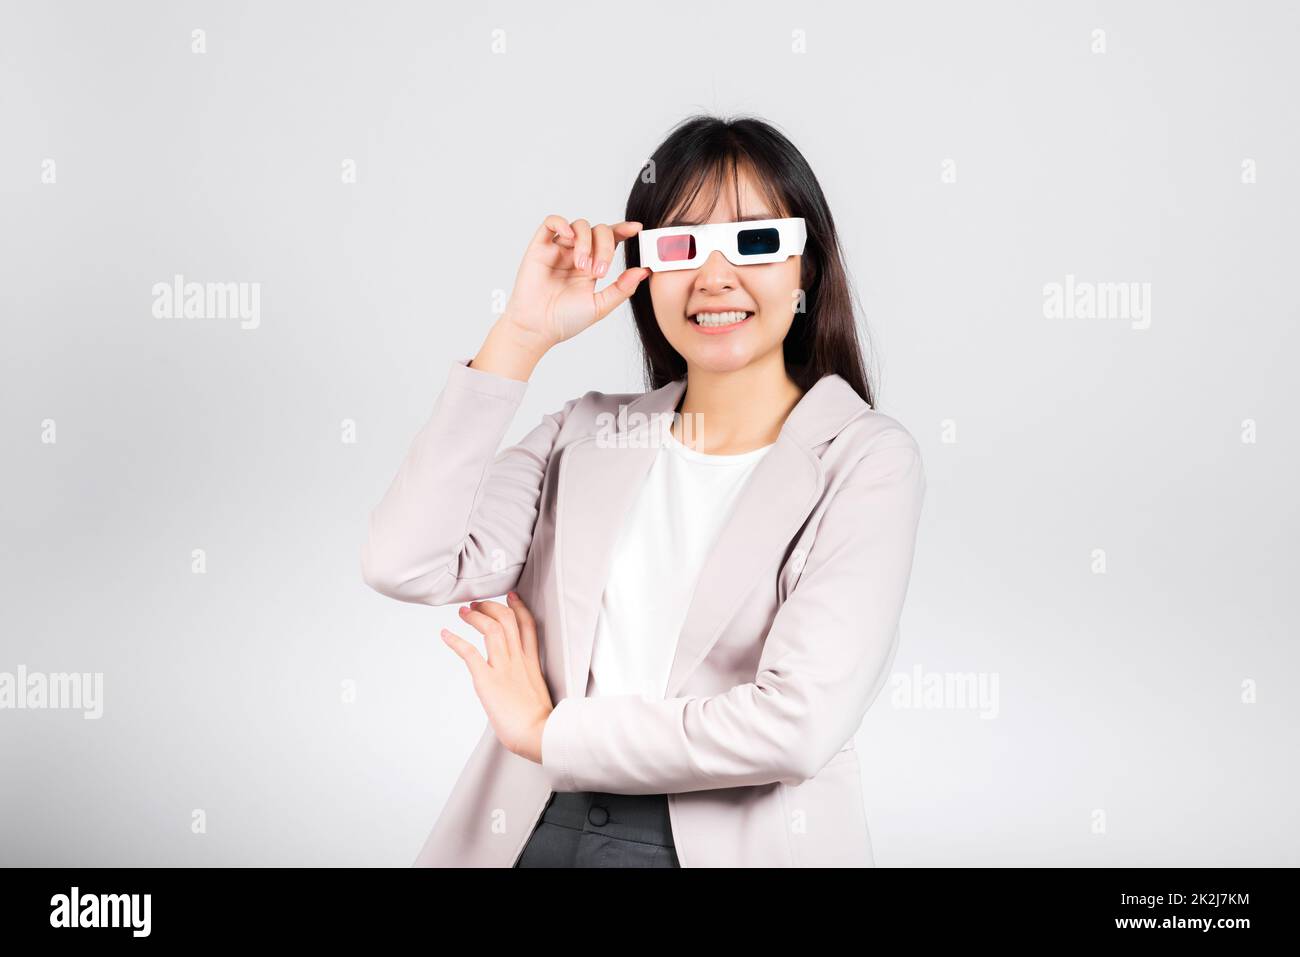 Smiling woman confidence wearing 3d cinema movie glasses Stock Photo